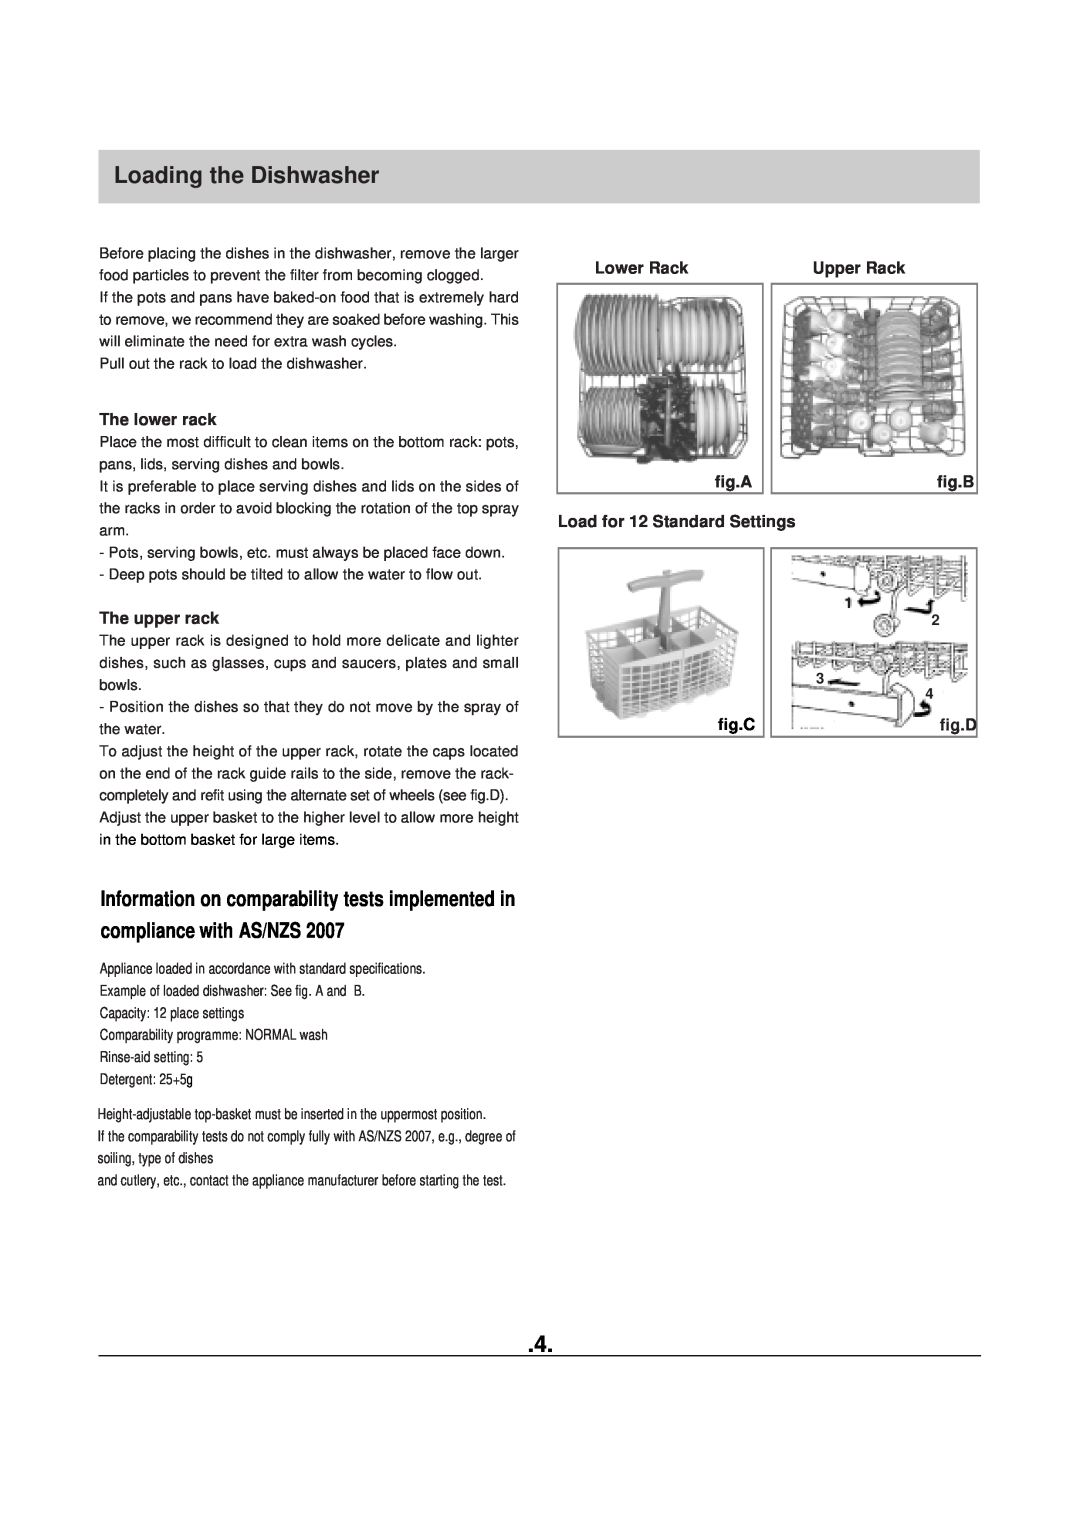 Haier HDW100WHT Loading the Dishwasher, fig.C, compliance with AS/NZS, Information on comparability tests implemented in 